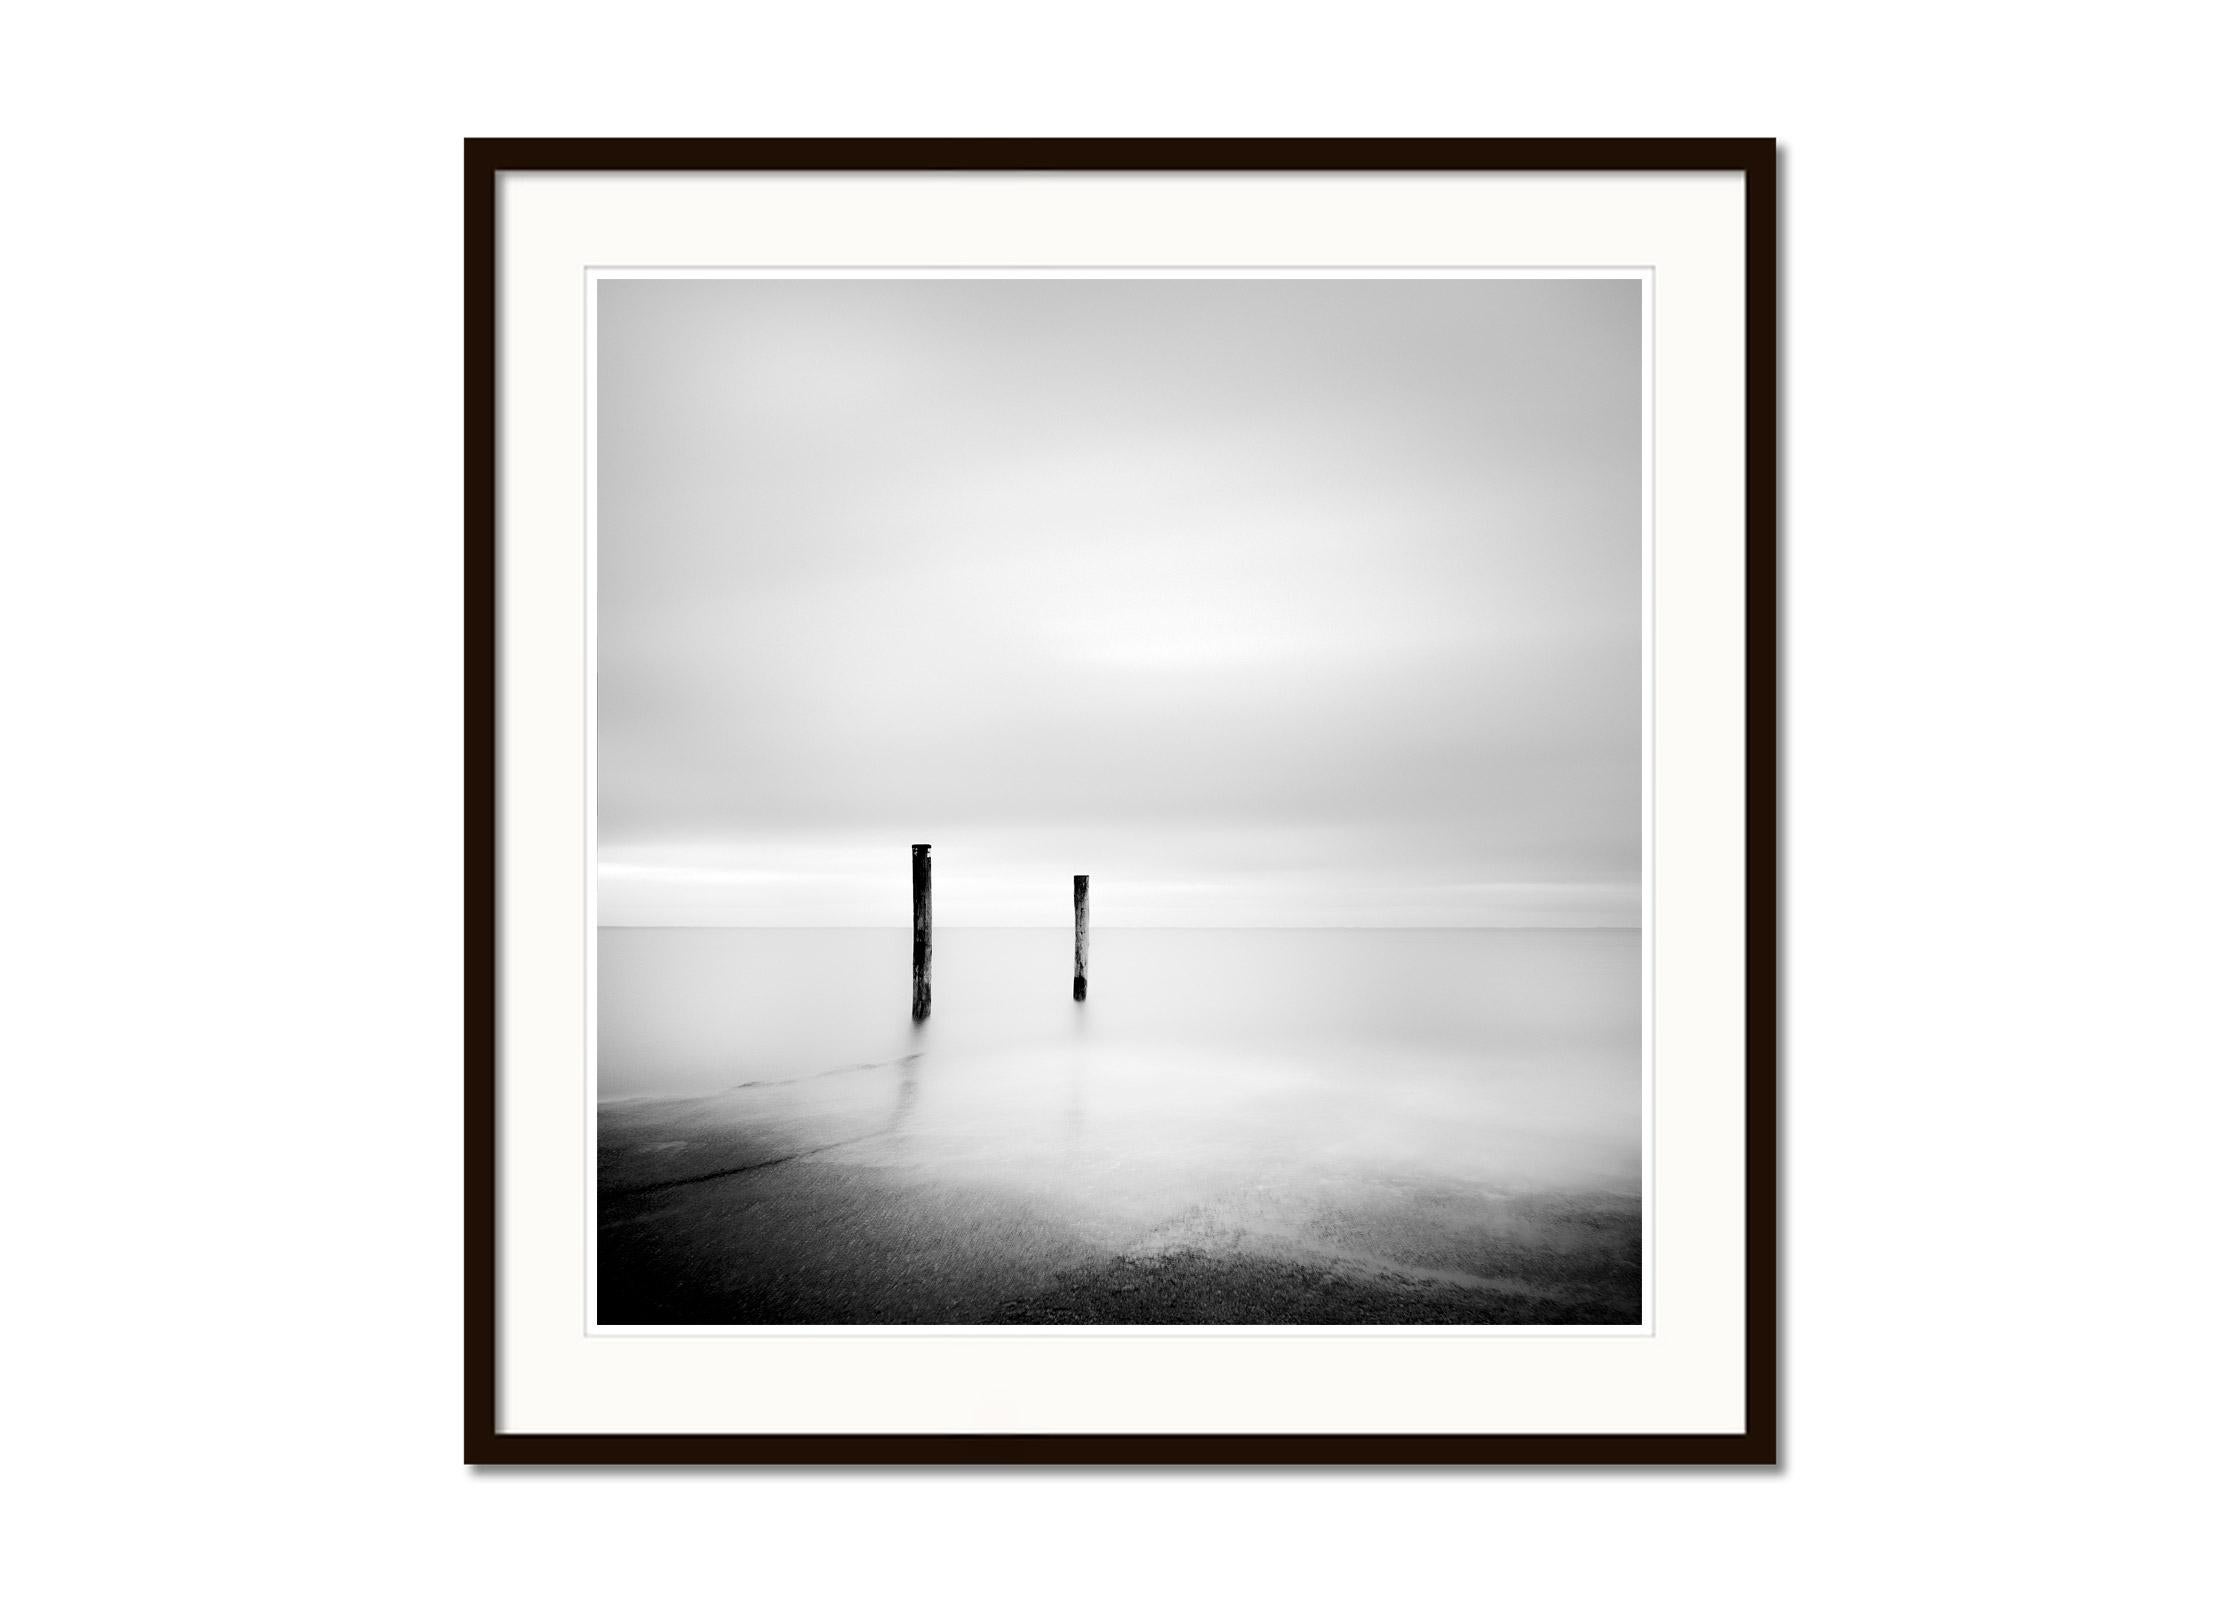 Two Wooden Stakes, Sylt, Germany, black and white long exposure art photography - Gray Black and White Photograph by Gerald Berghammer